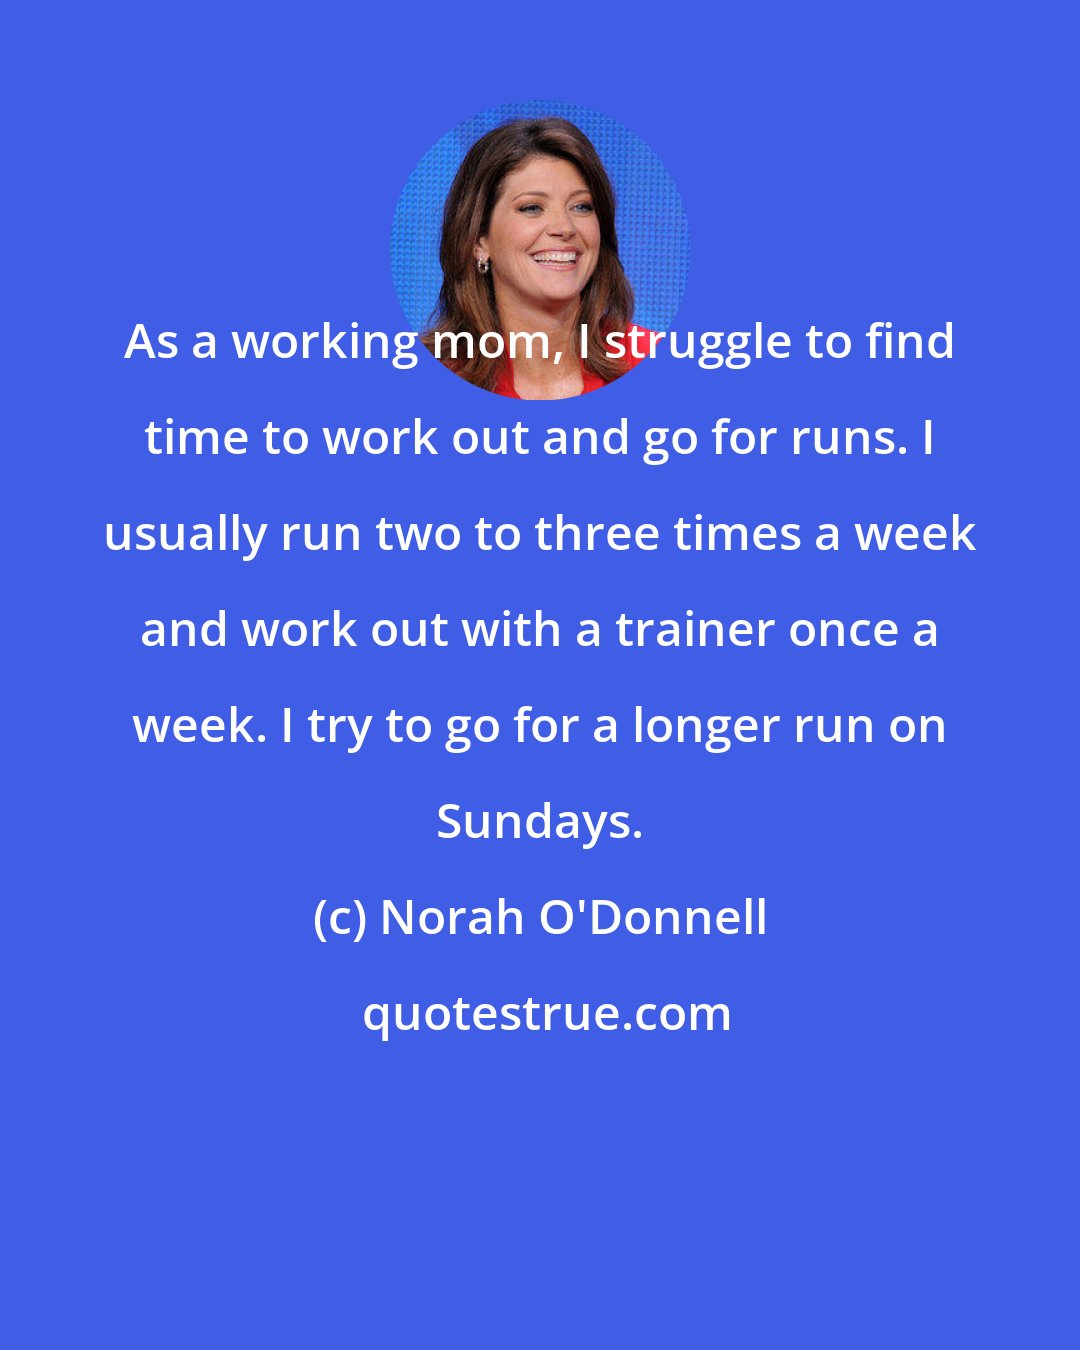 Norah O'Donnell: As a working mom, I struggle to find time to work out and go for runs. I usually run two to three times a week and work out with a trainer once a week. I try to go for a longer run on Sundays.